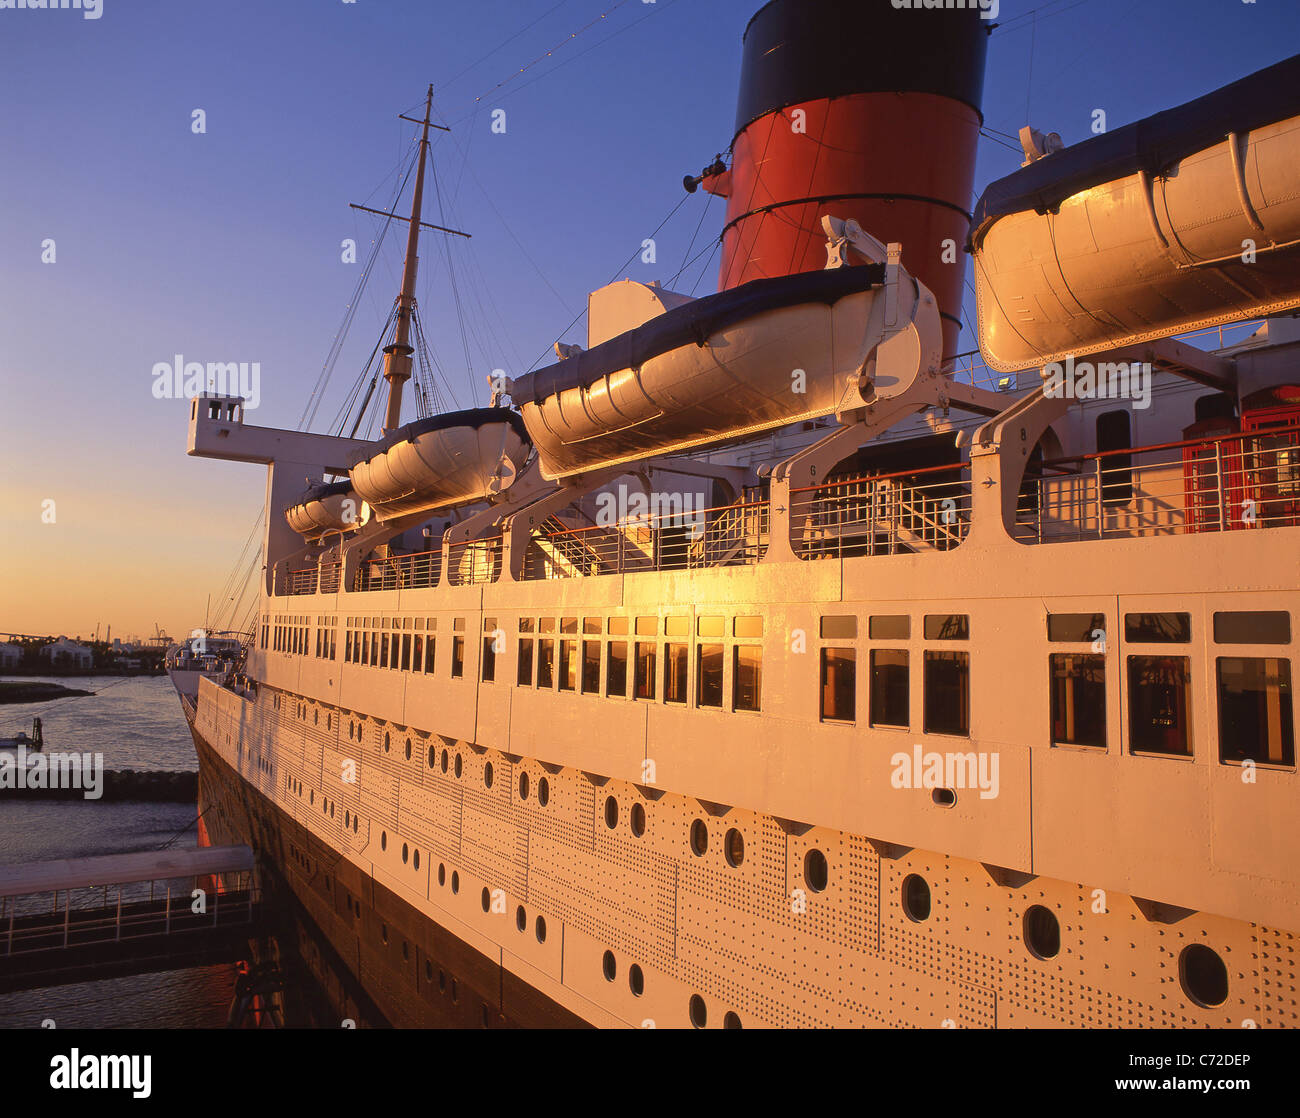 The Queen Mary at sunset, Queens Highway, Long Beach, Los Angeles, California, United States of America Stock Photo